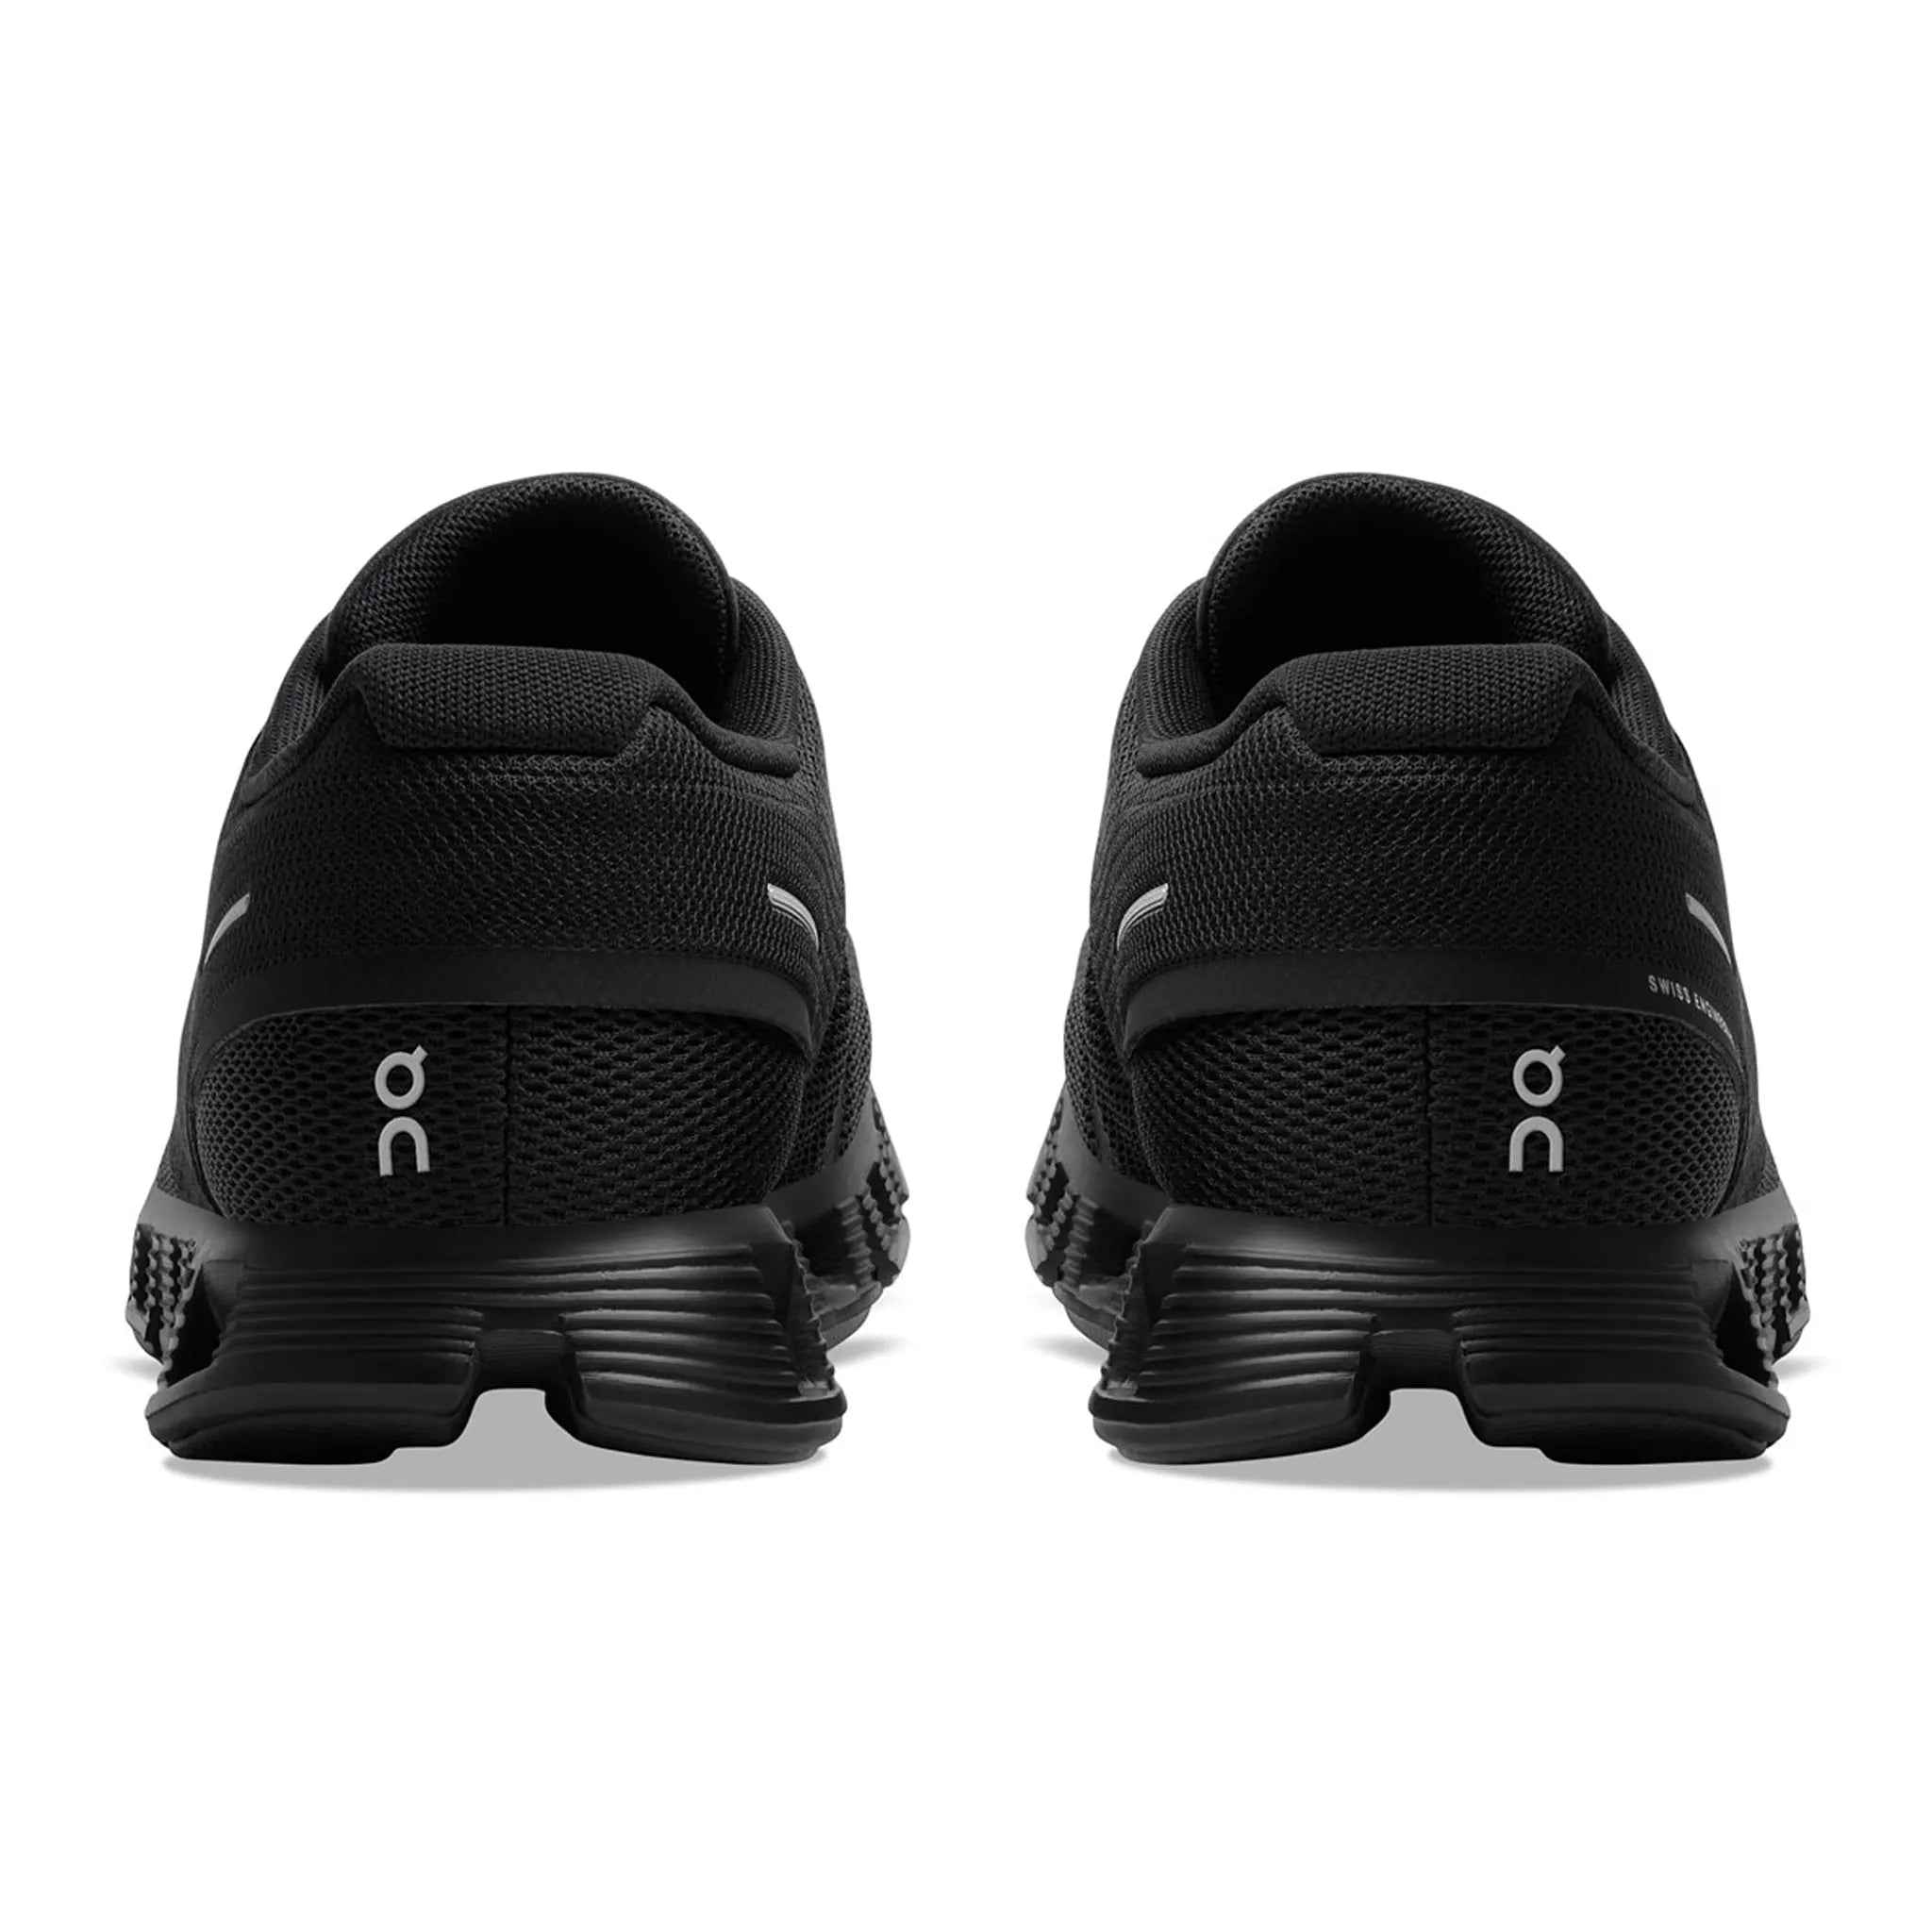 Back view of On Running Cloud 5 All Black (W)